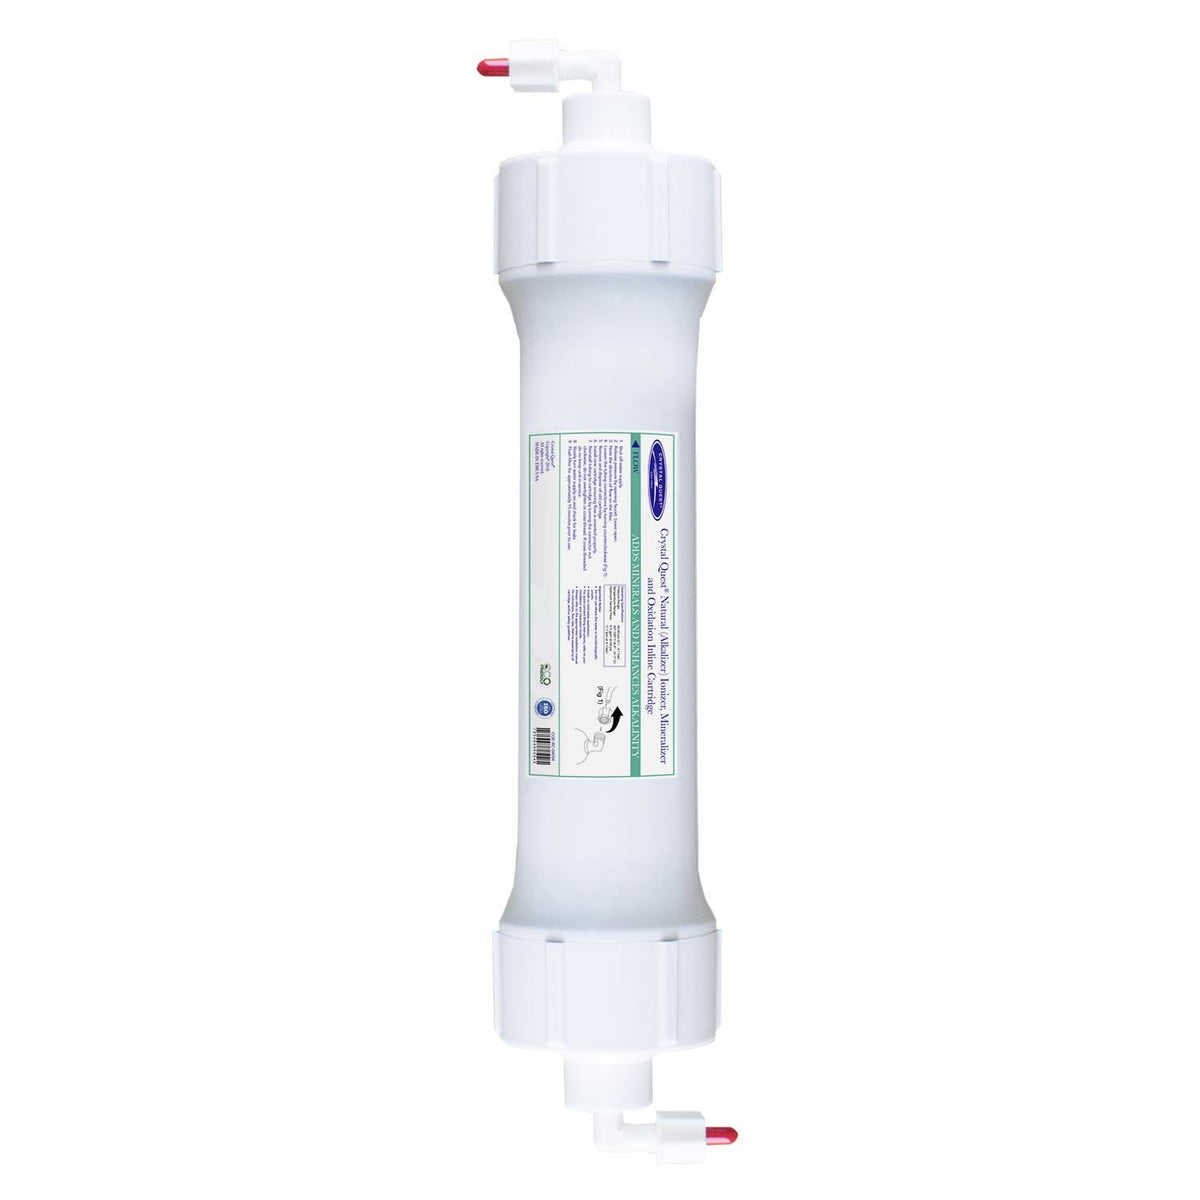 Natural (Alkalinize) Ionizer, Mineralizer and Oxidation Inline Cartridge - Water Filter Cartridges - Crystal Quest